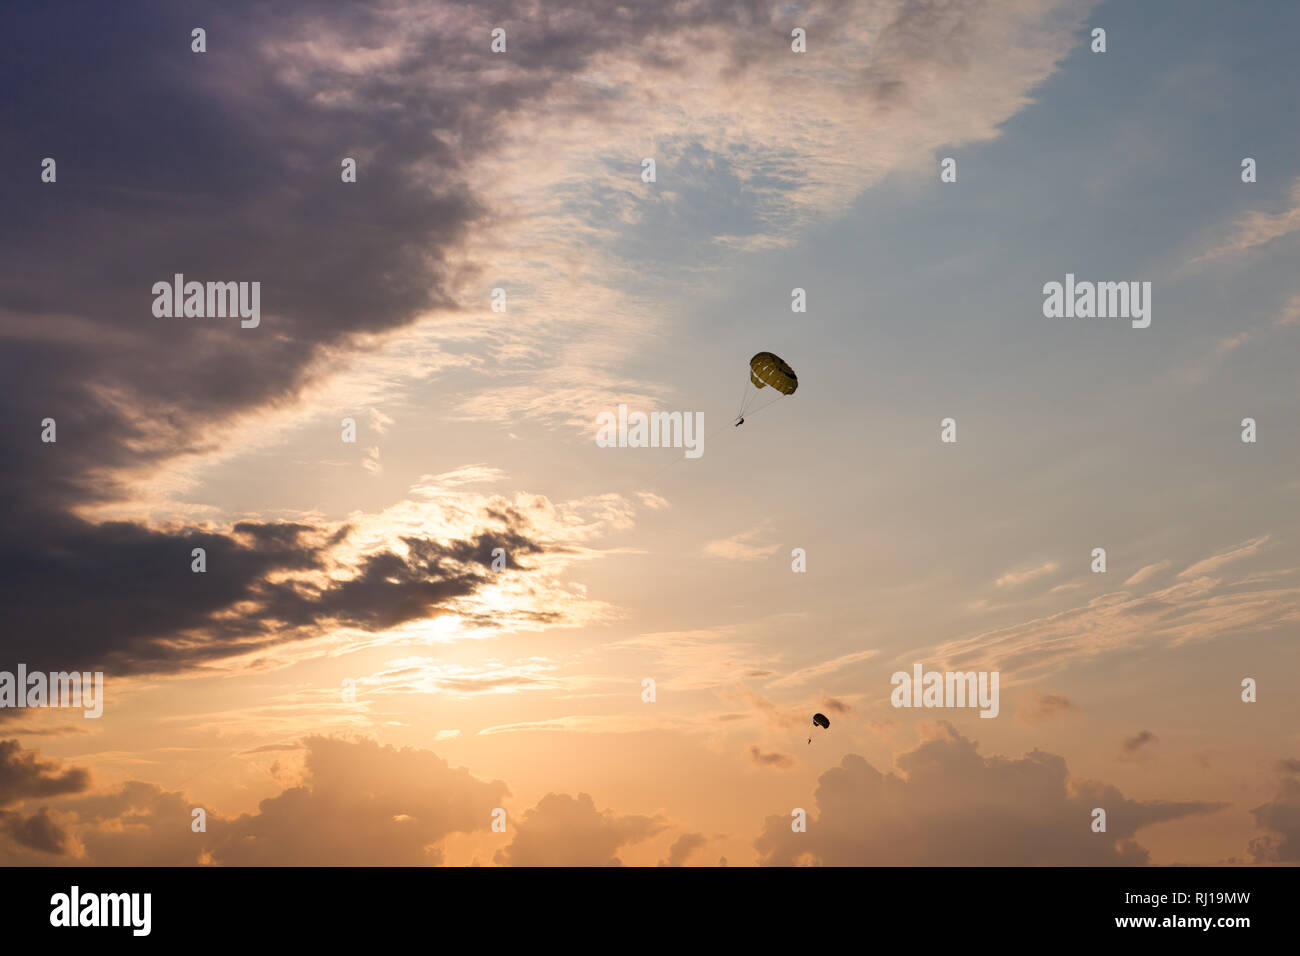 Dark silhouettes of flying parachutes on the sunset cloudy night sky Stock Photo